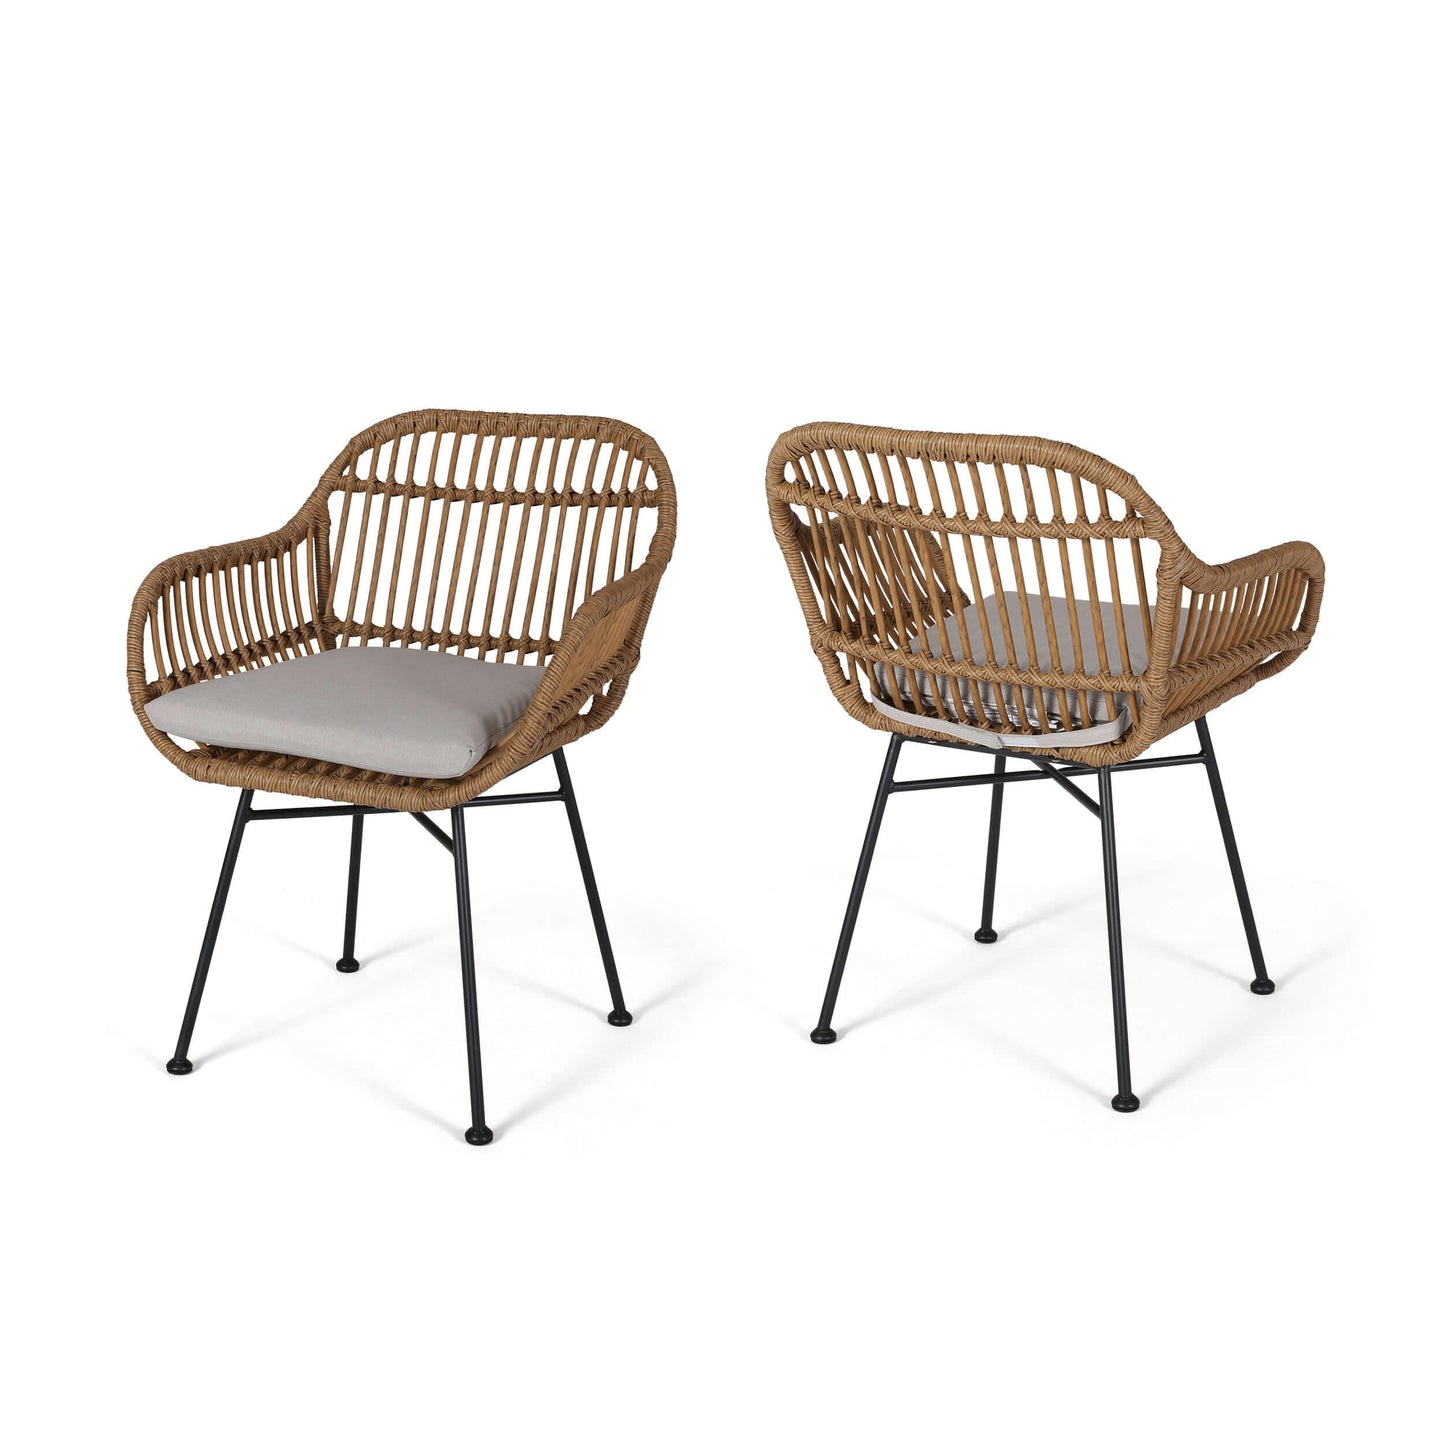 Rattan Chairs Set of 2 - Outdoor Rattan Chairs Set with Cushions-Rattan Chairs-NOFRAN